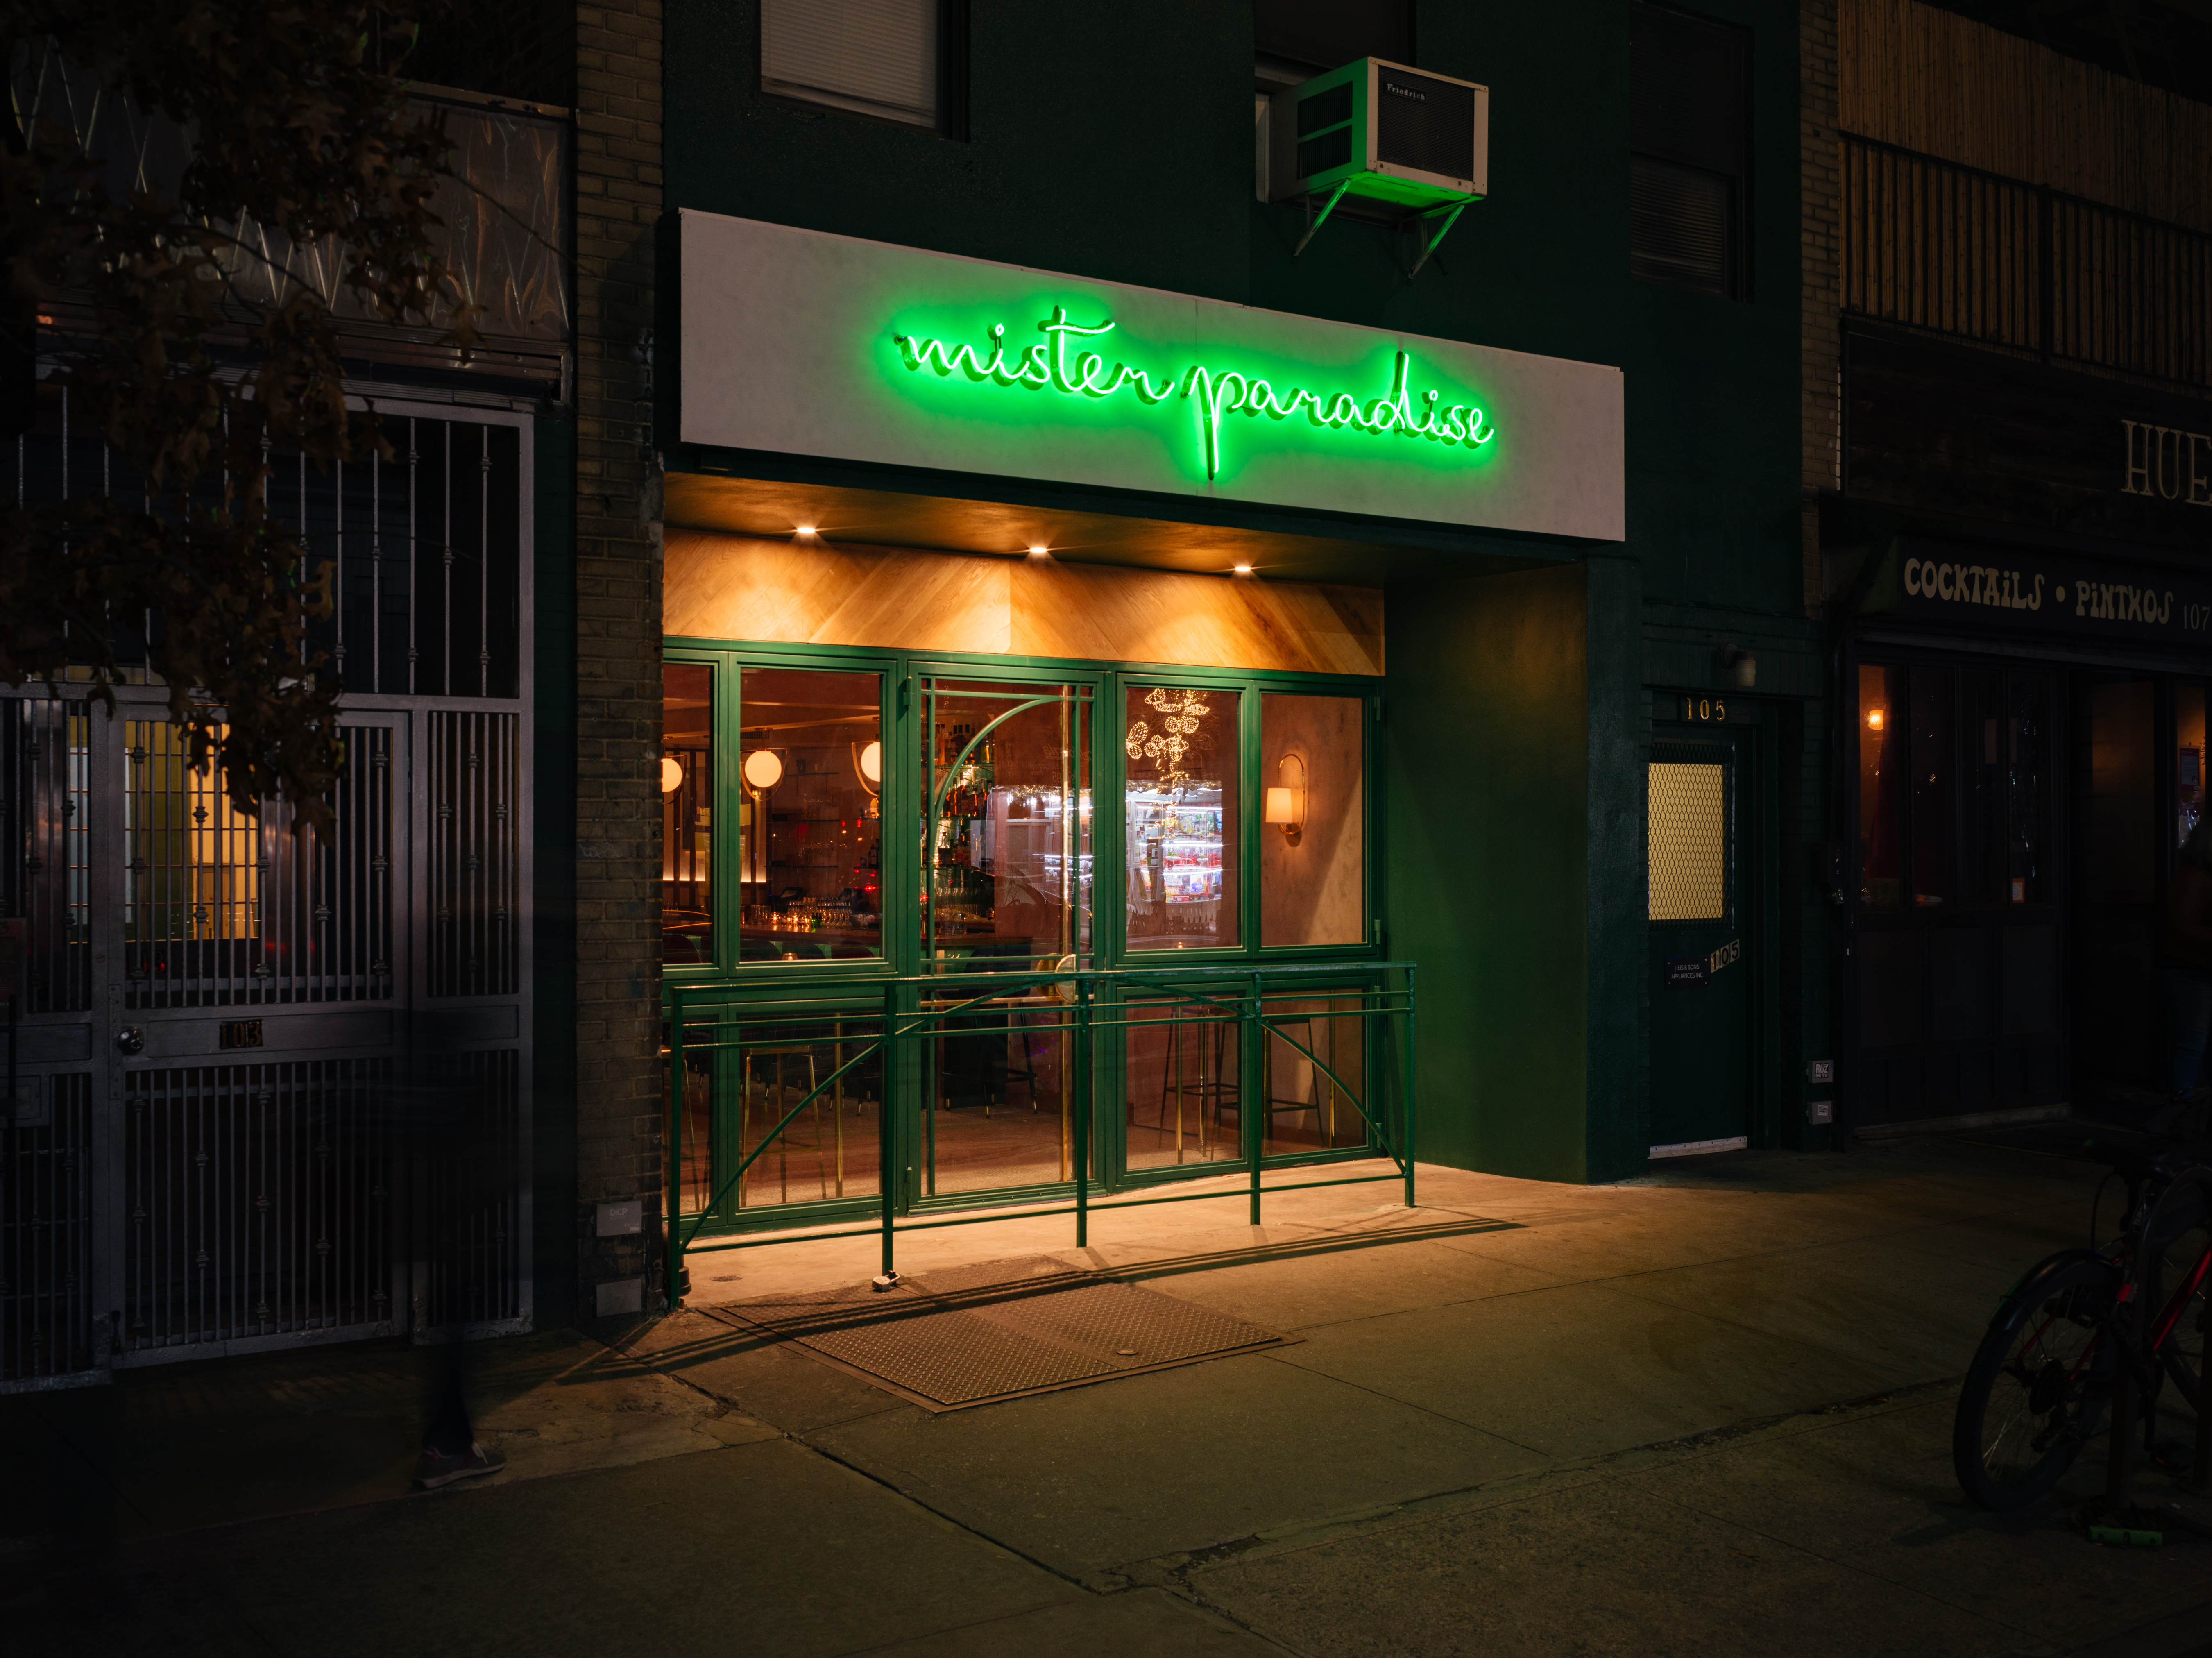 The exterior of a bar with a green railing and a green neon sign that says “Mister Paradise” in cursive lettering